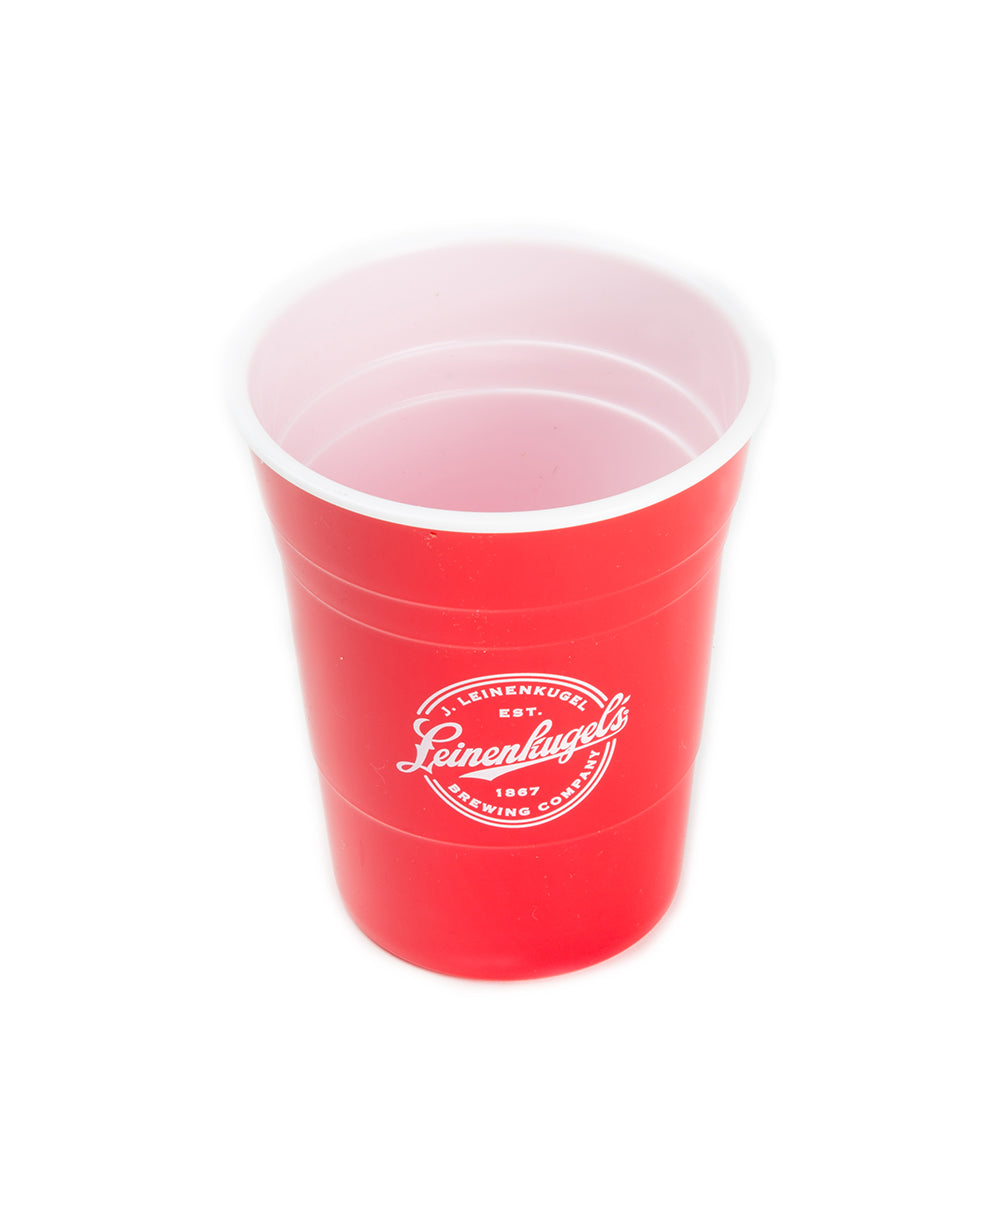 REUSABLE RED PARTY CUP